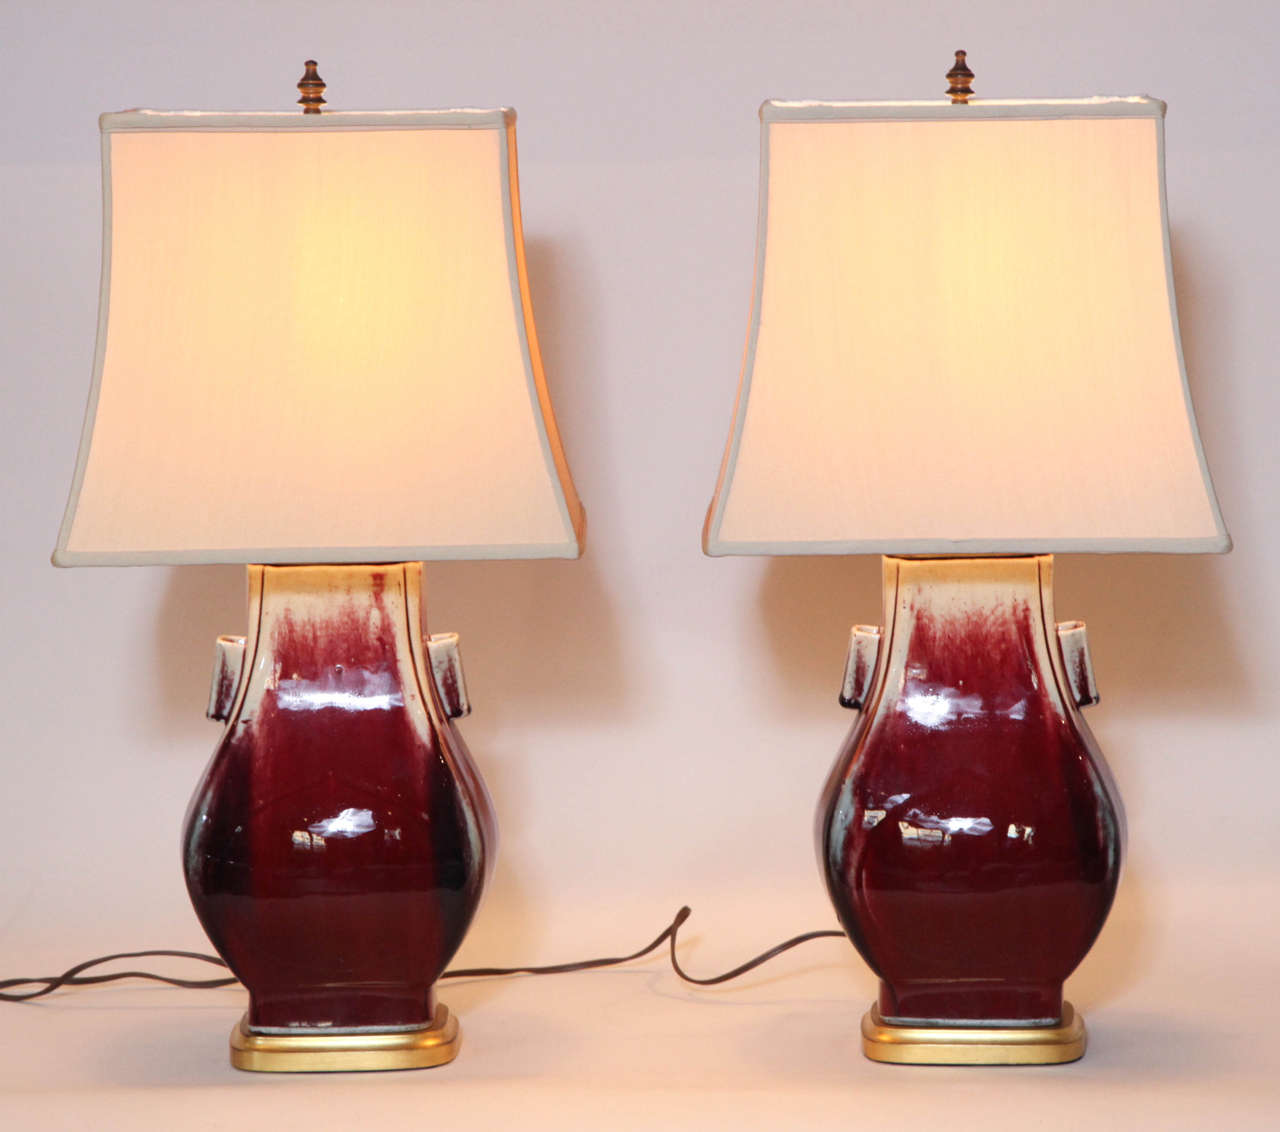 Rectangular with tapering neck and two tubular handles. Oxblood red glaze streaks with corners in purple. Mounted on a wood base and wood top. Both entirely covered with gold leaf. Rectangular silk shades.

Electrified for 3 way bulb and in good